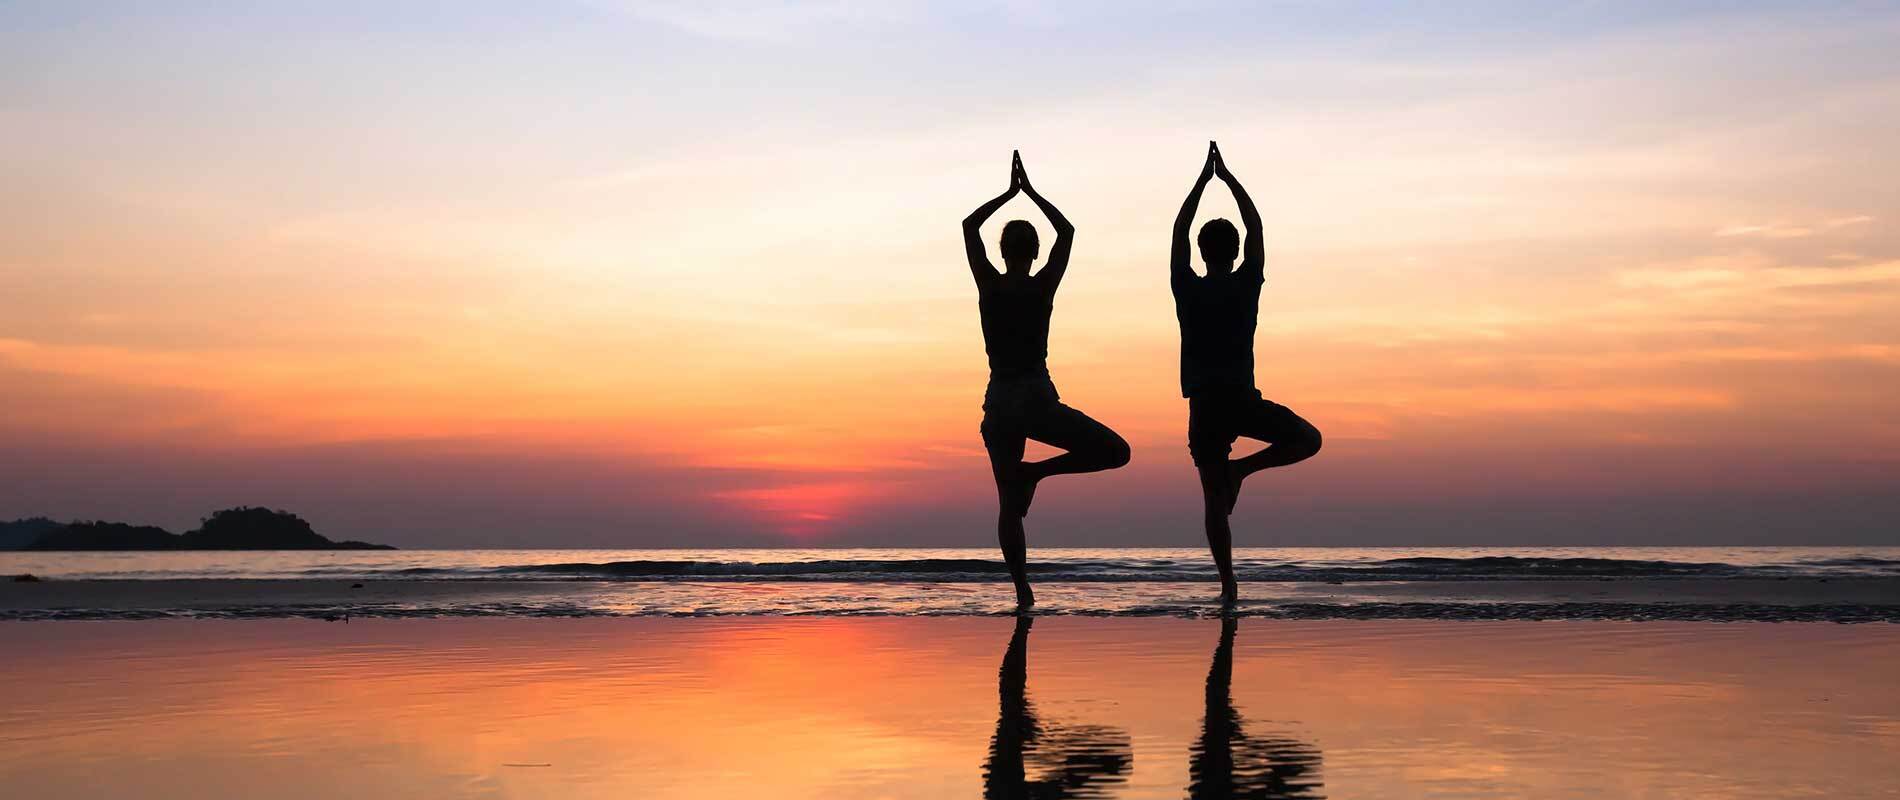 Yoga Poses on the Beach at Sunset